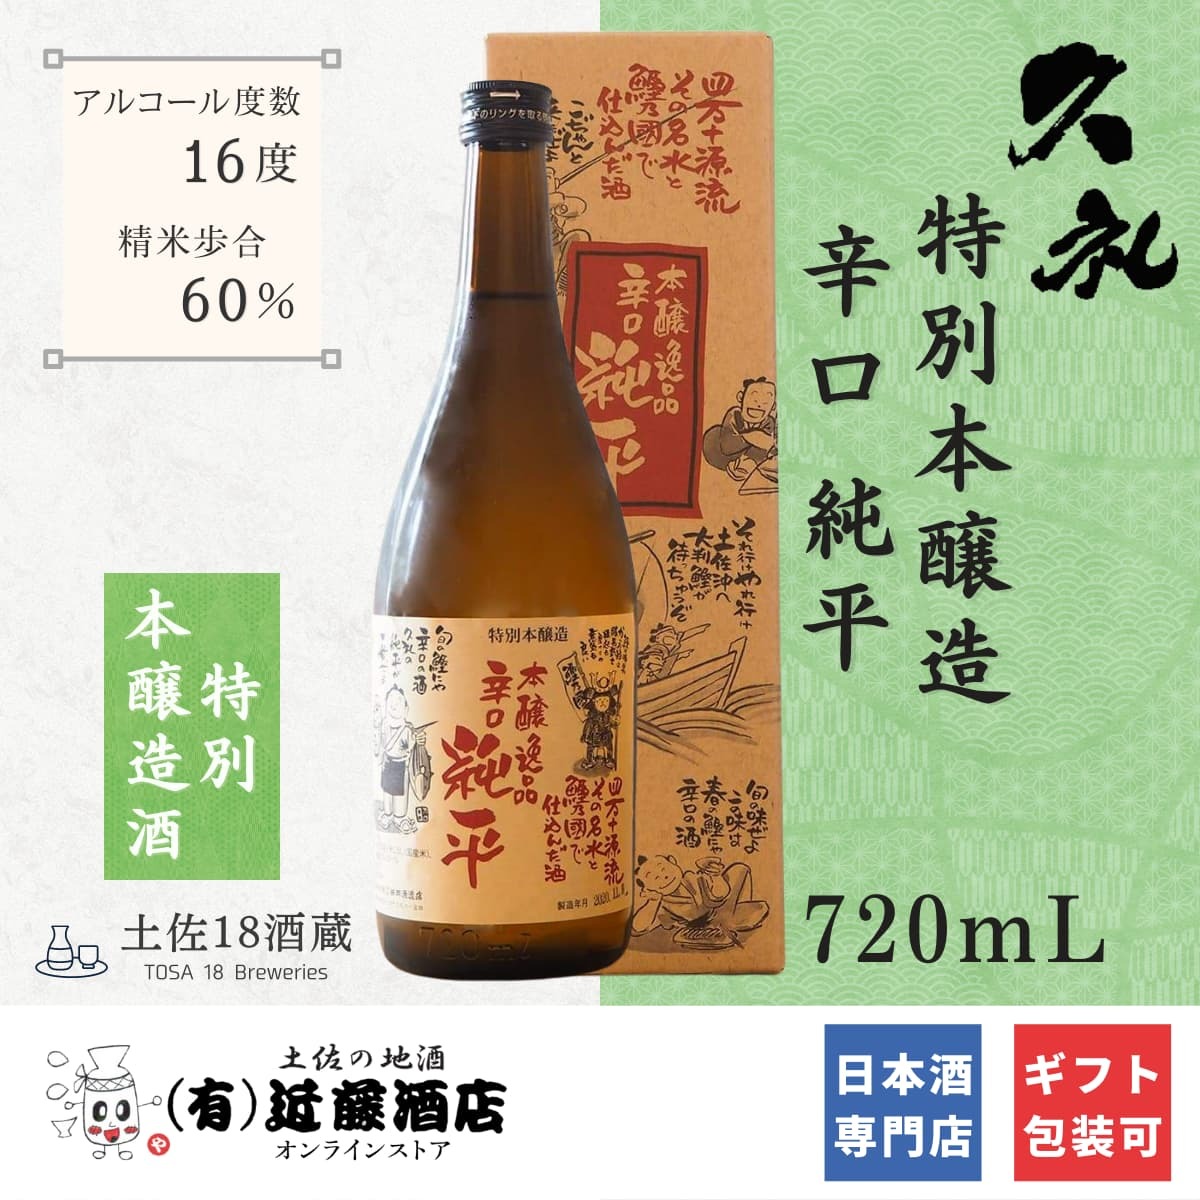  japan sake liking .. special book@. structure .. west hill sake structure original flat 720mL liking ... person .OK..... normal temperature .. goods present gift man woman . earth production celebration .. festival ...